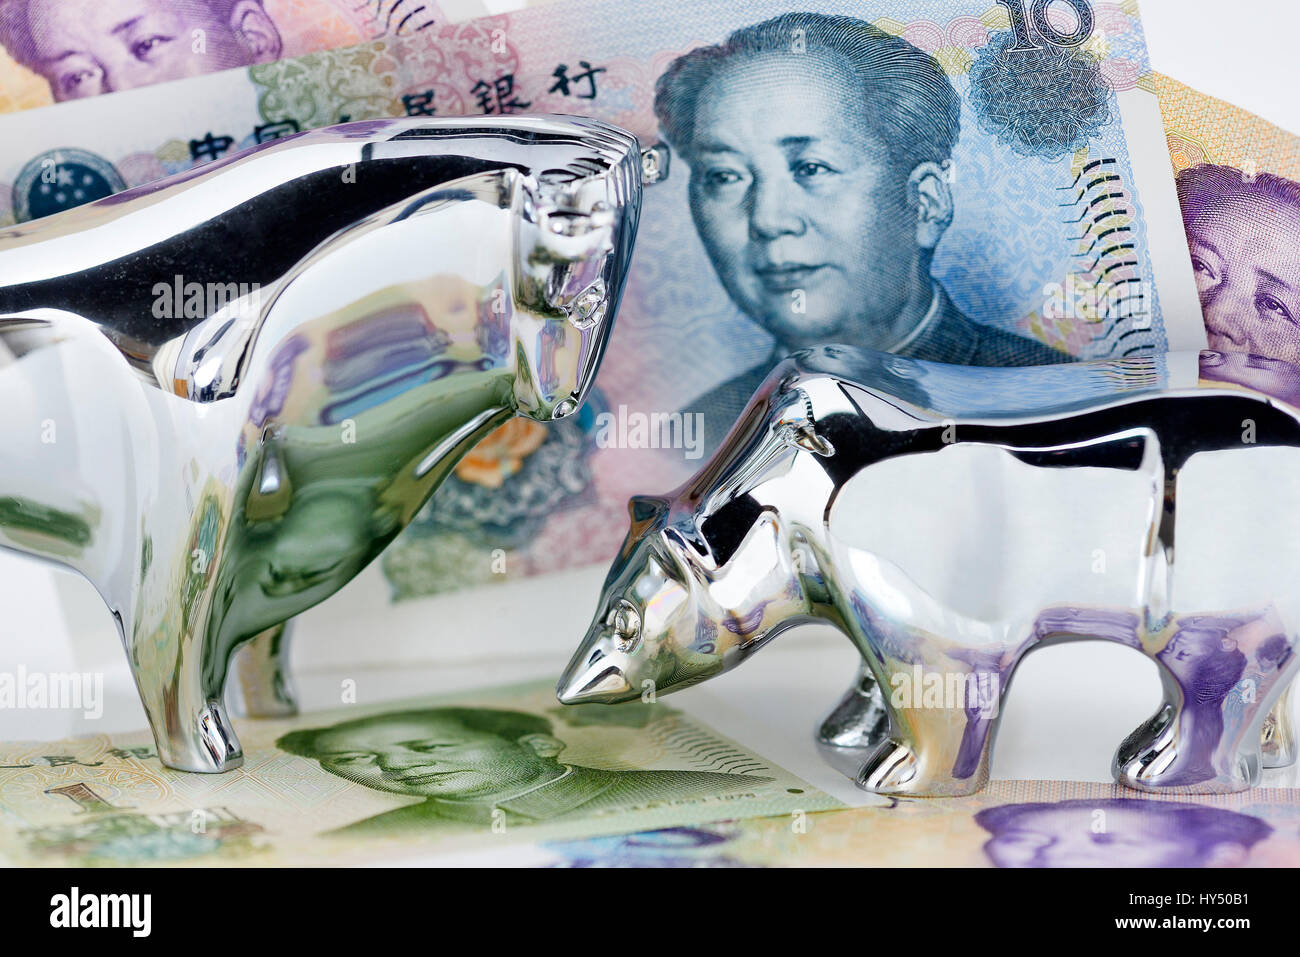 Stock market symbol bull and bear before Chinese bank notes, stock market fluctuations in China, Boersensymbol Bulle und Baer vor chinesischen Geldsch Stock Photo